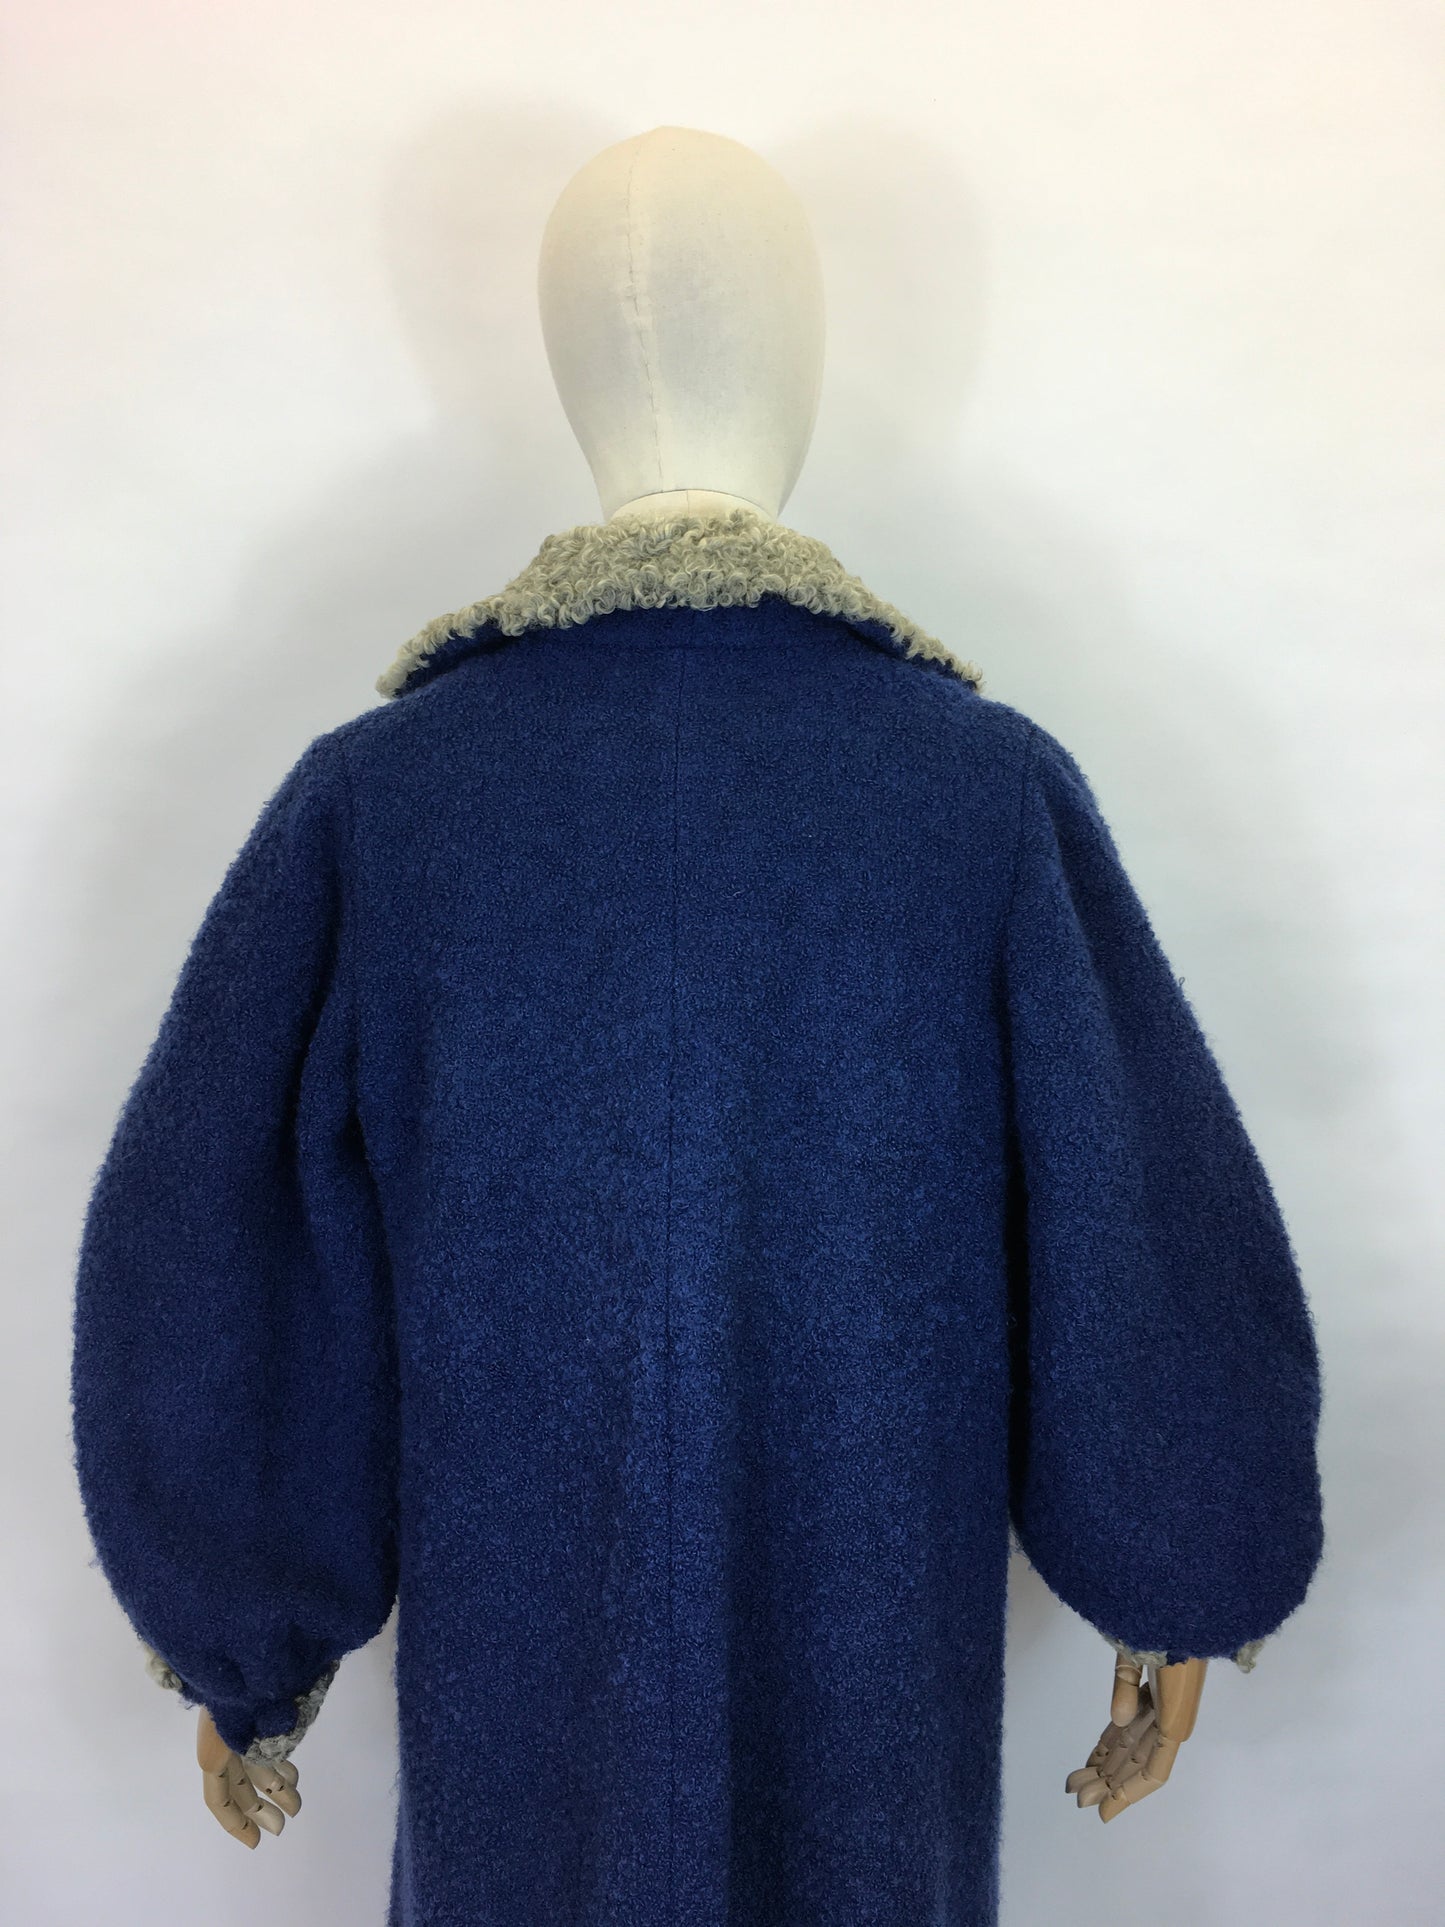 Original 1940’s Amazing Boucle Wool Coat with Astrakhan Trim - In a Royal Blue and Soft Grey